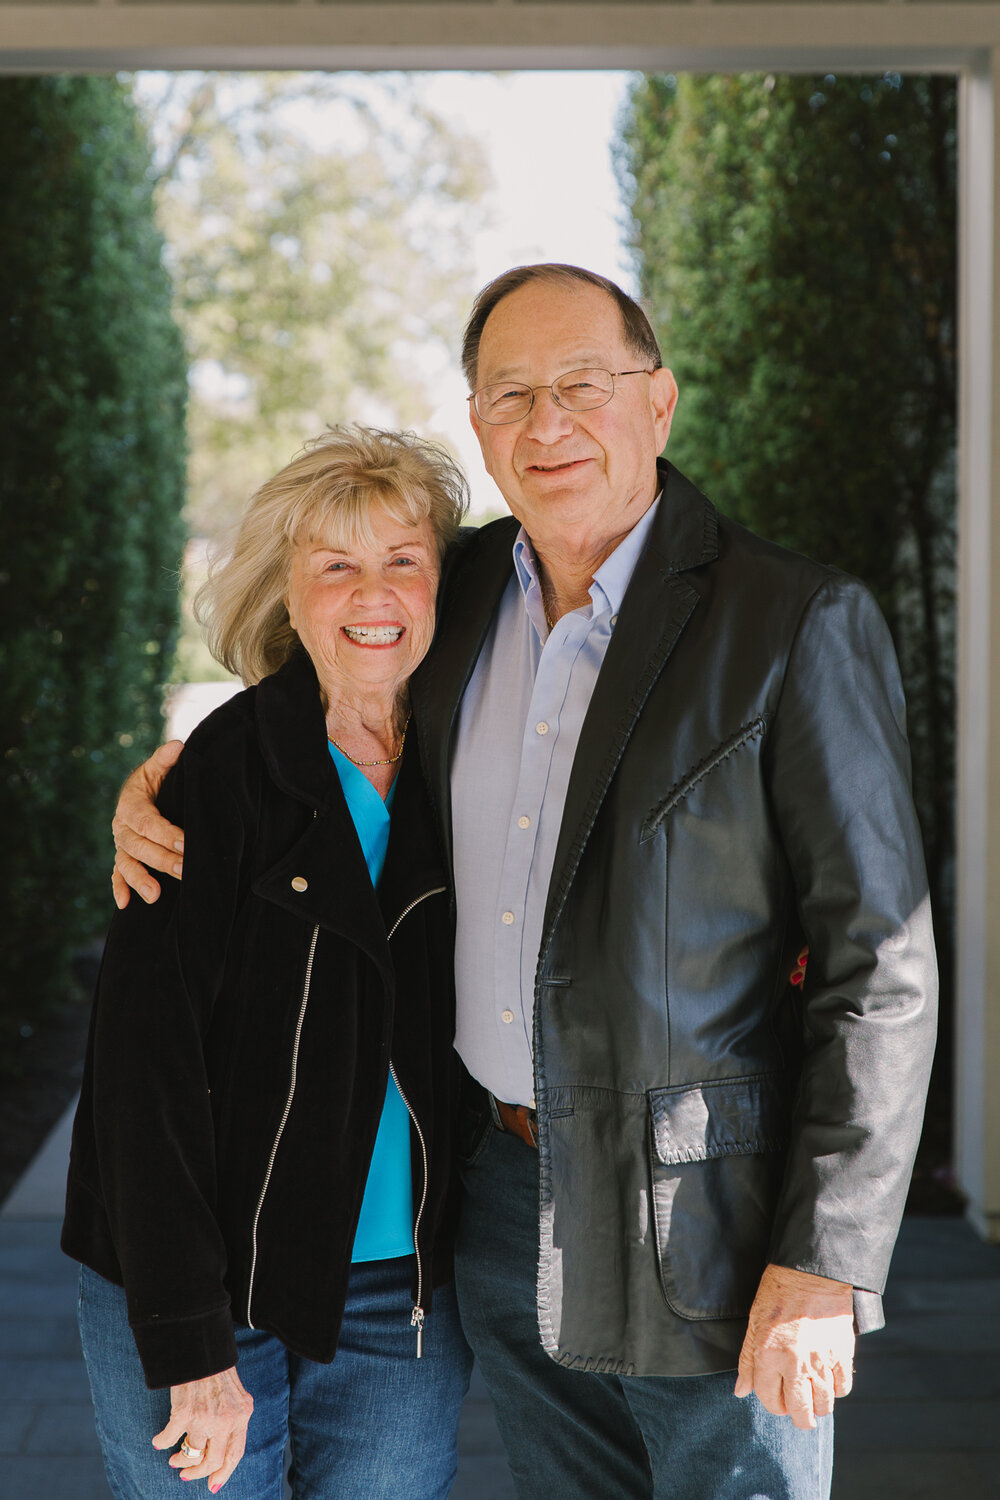 Former Franklin Square resident Murray Pasternack, a graduate of Farmingdale State College Class of 1960, recently donated $750,000 to the college for the ‘Murray 
Pasternack '60 Finance and Trading Room with his life partner, Judy Berkowitz.